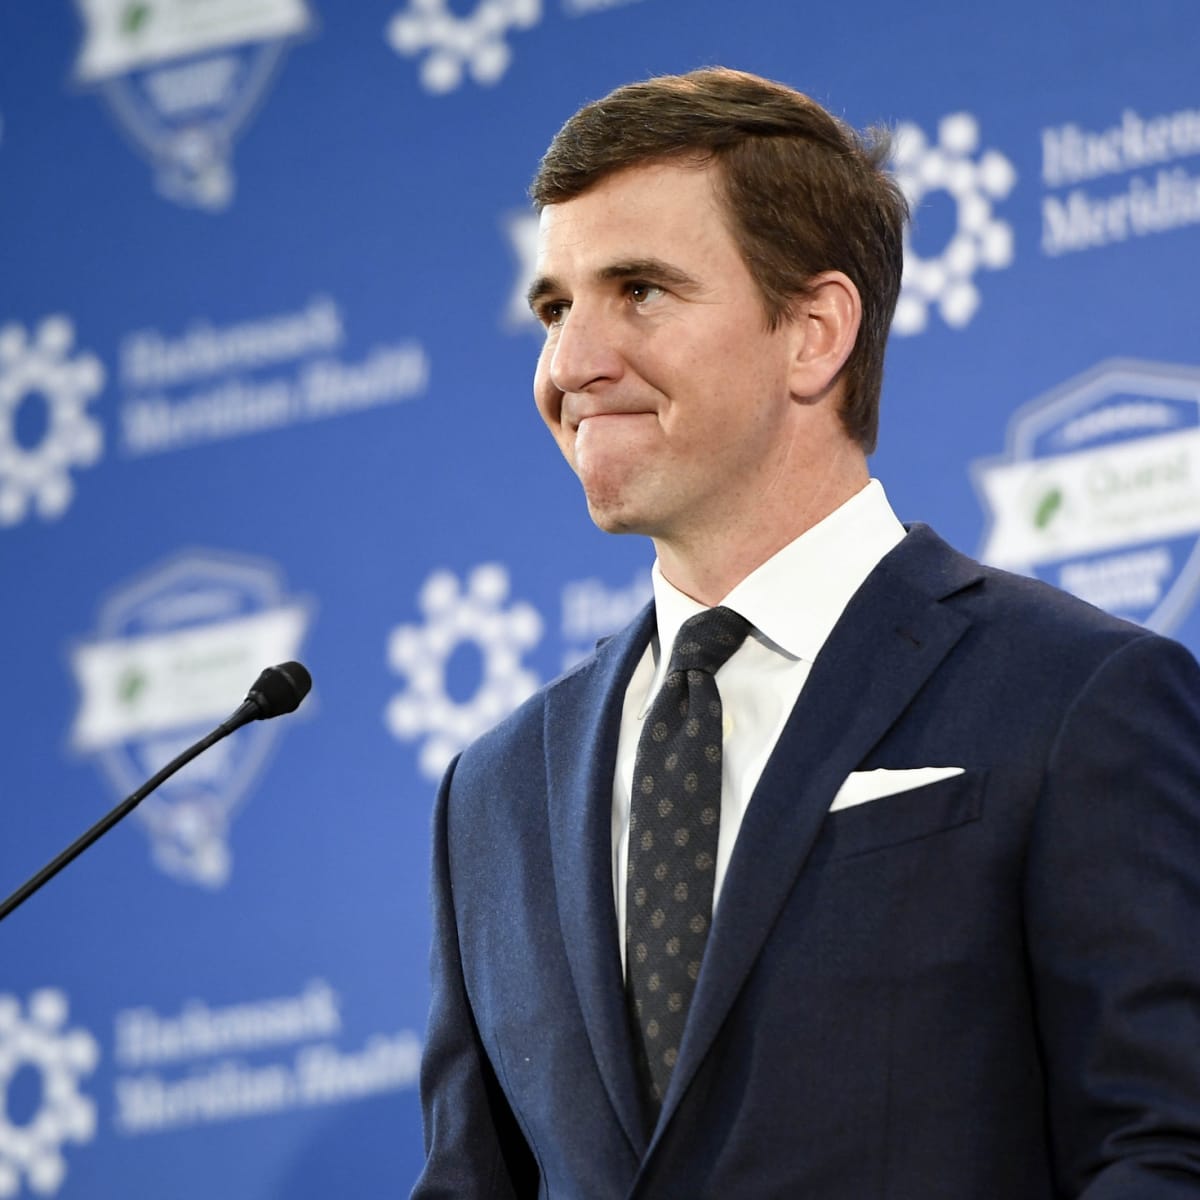 Only a Giant': Eli Manning's retirement ceremony